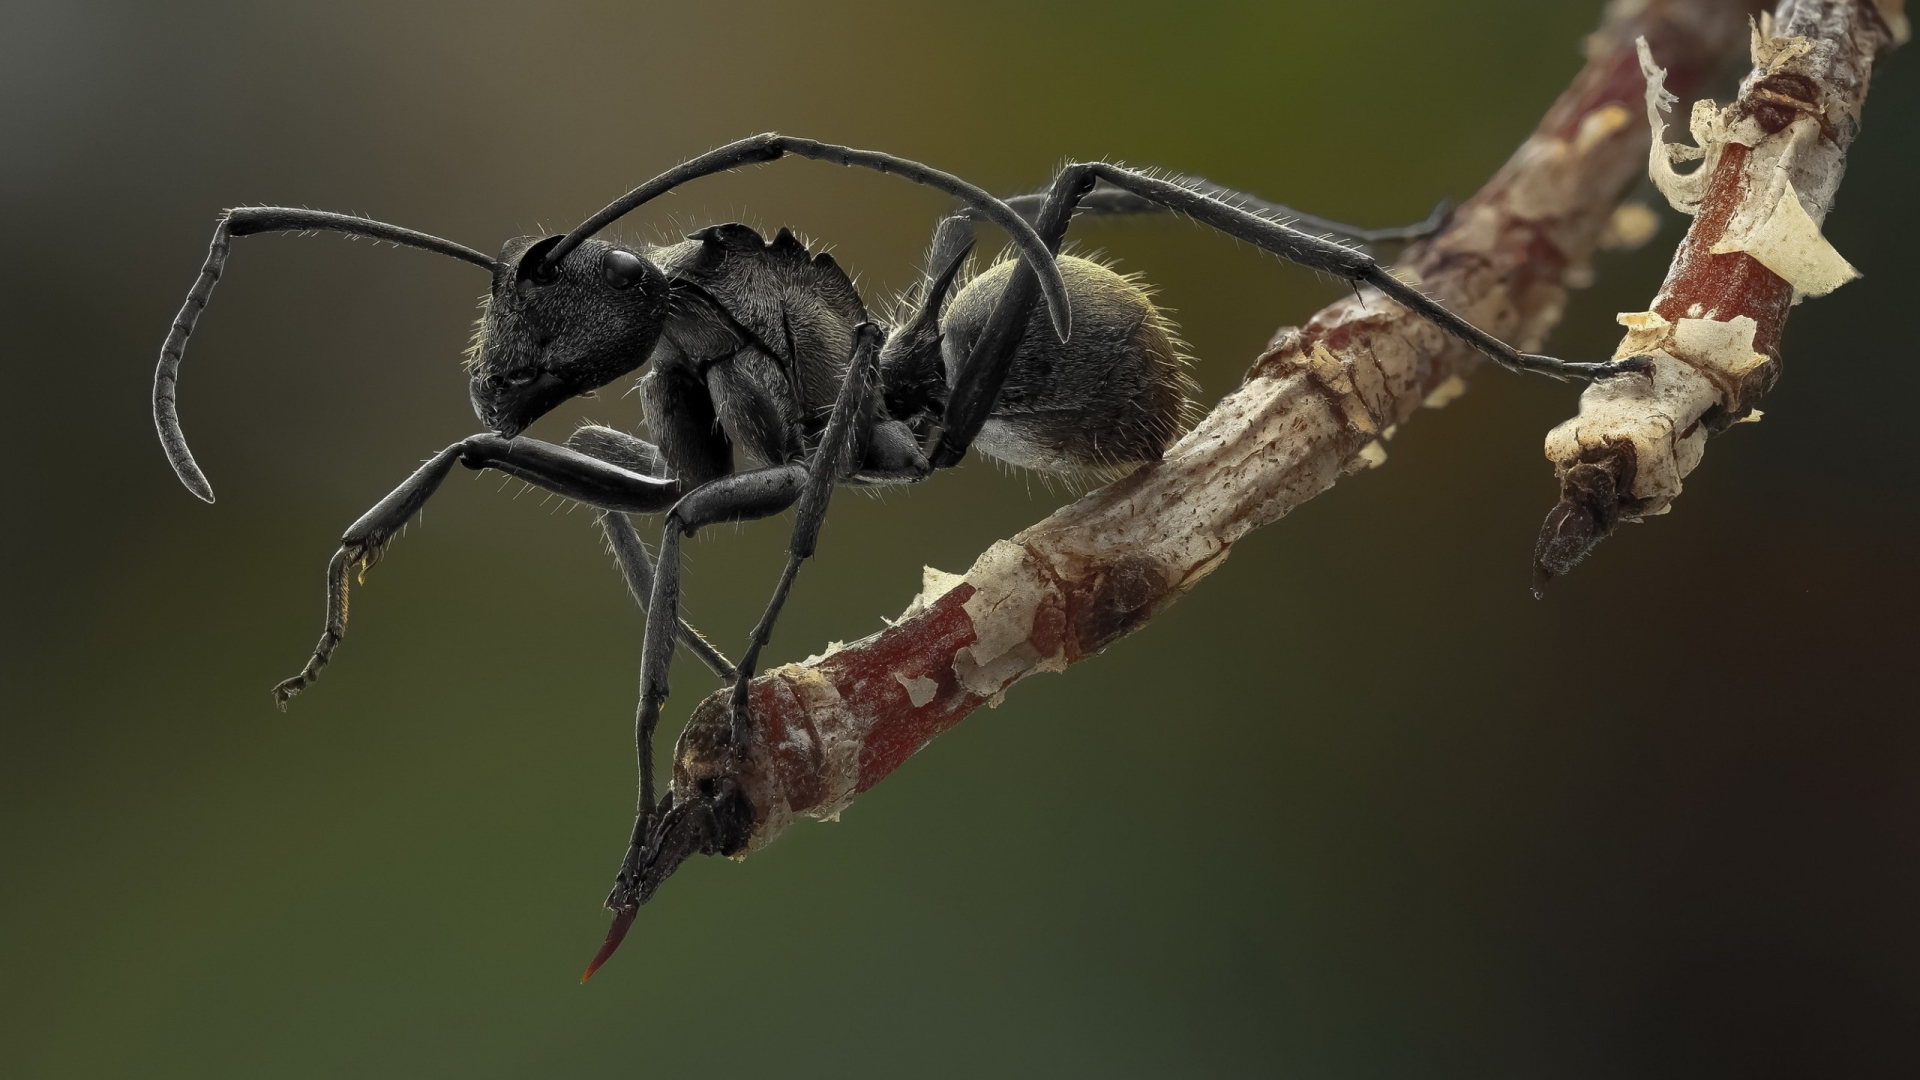 Ant Macro Photography for 1920 x 1080 HDTV 1080p resolution